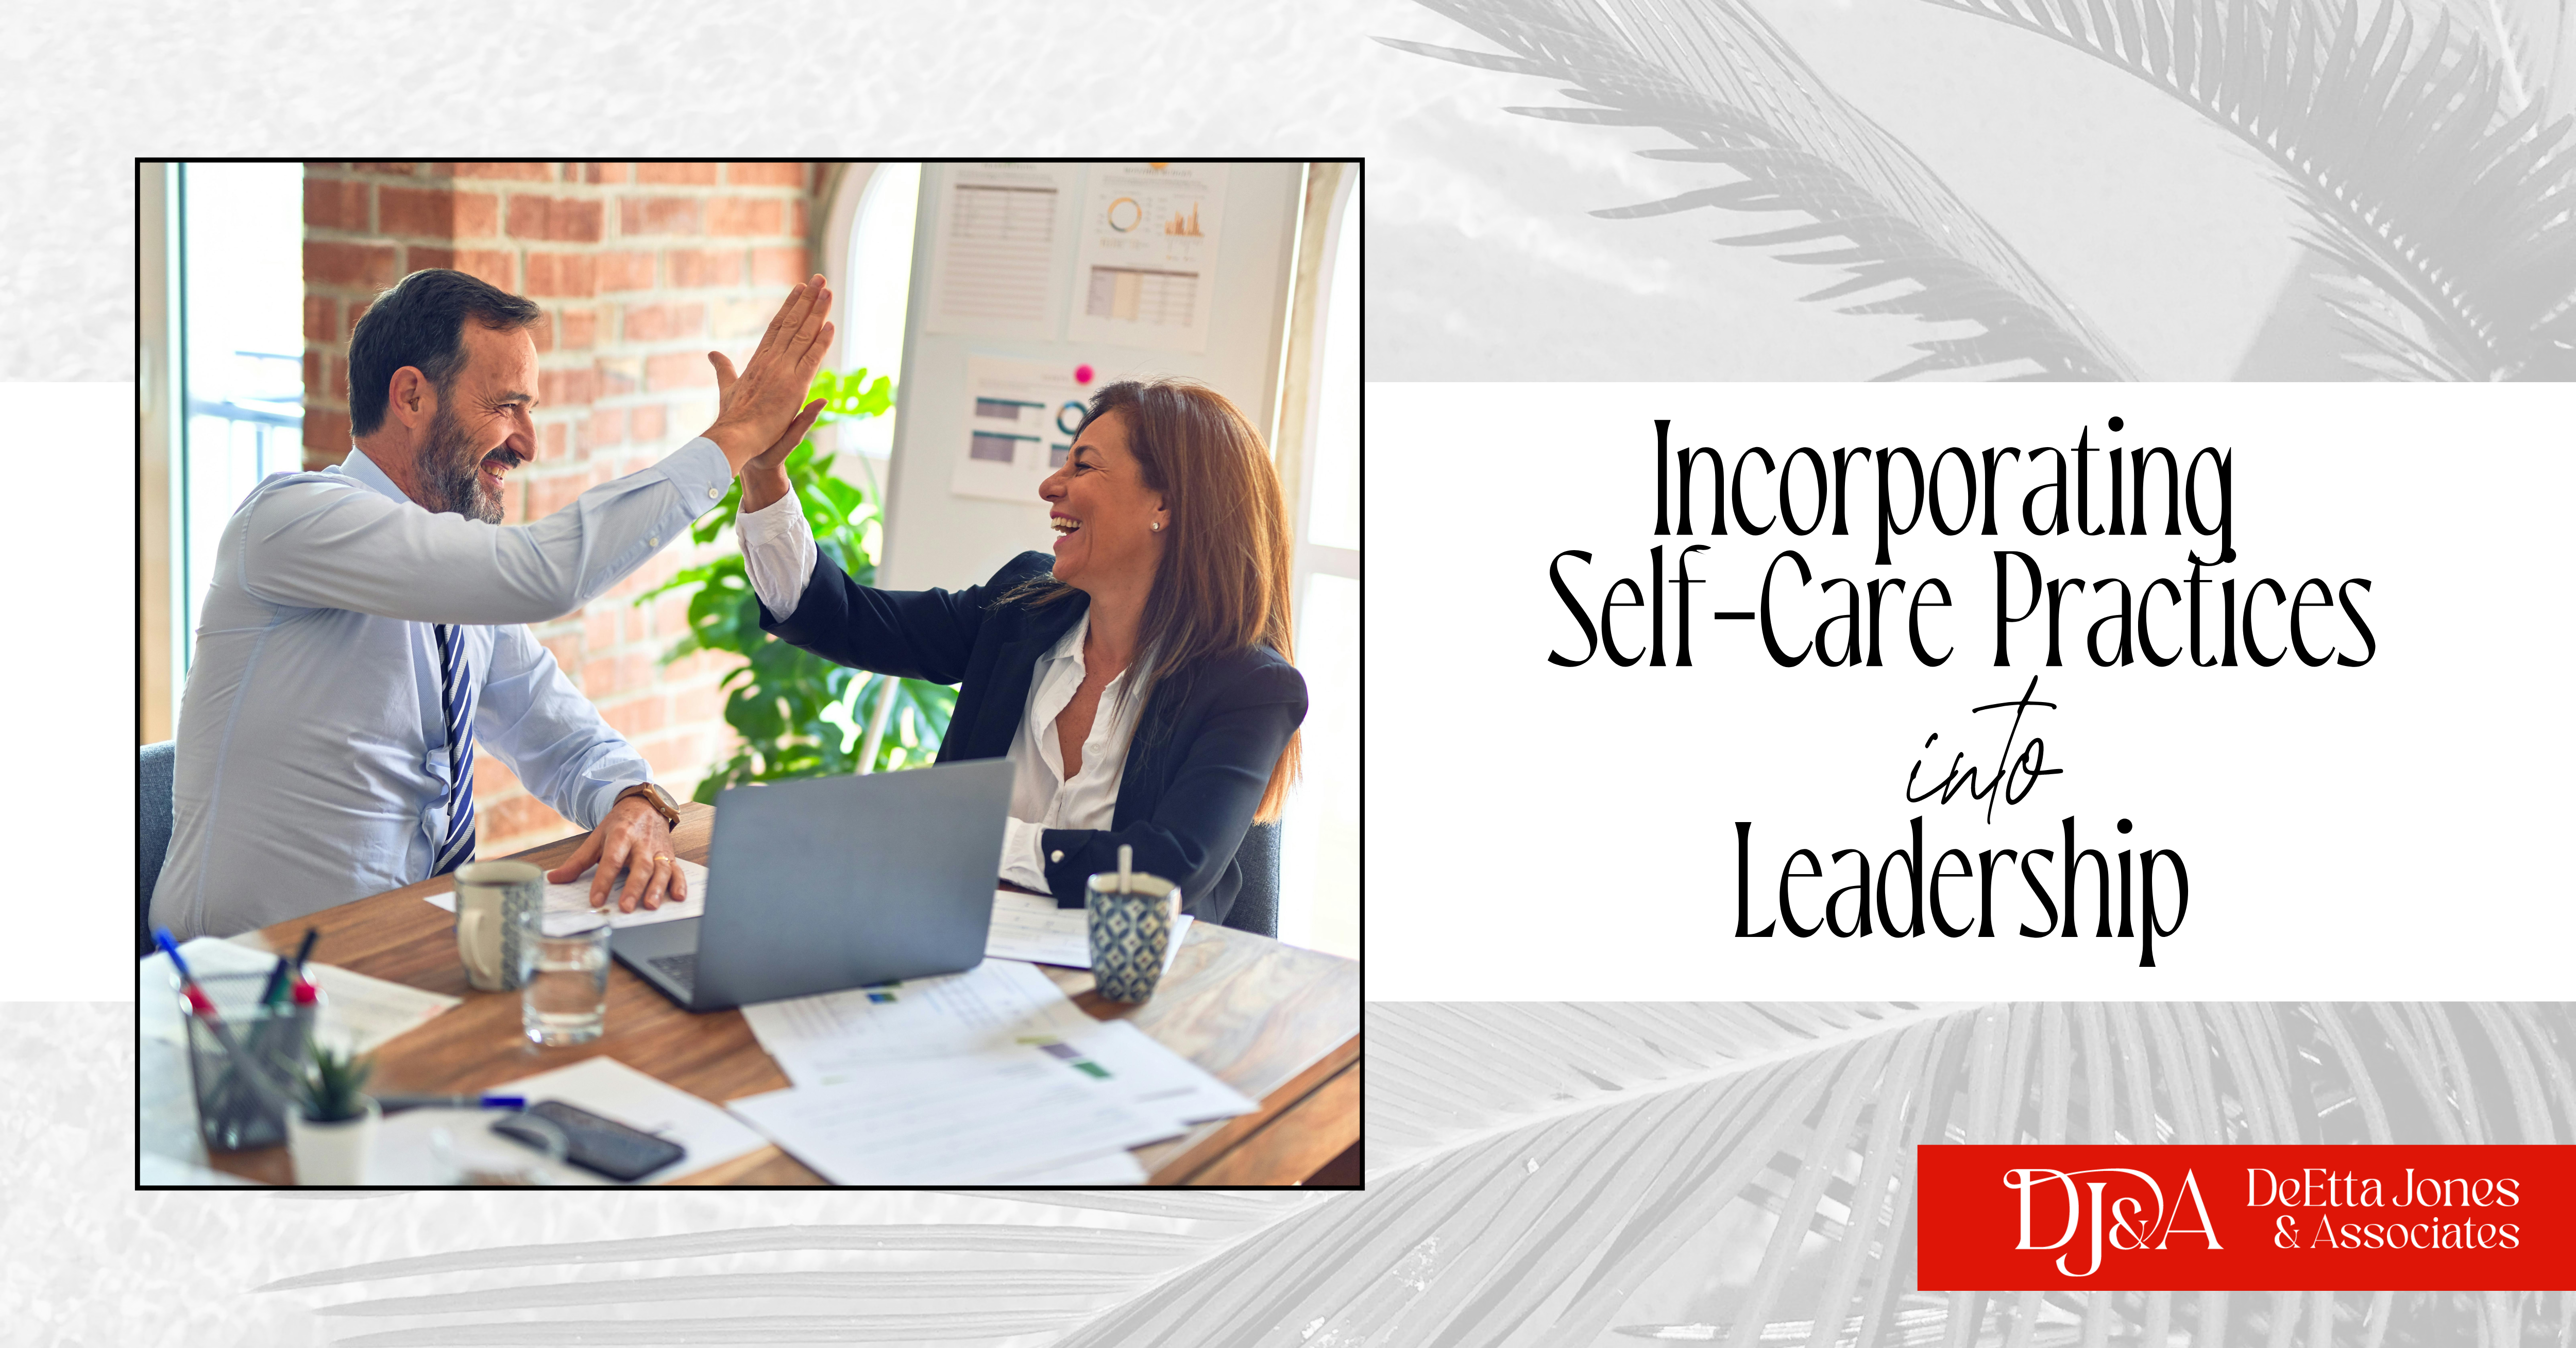 Incorporating Self-Care Practices Into Leadership